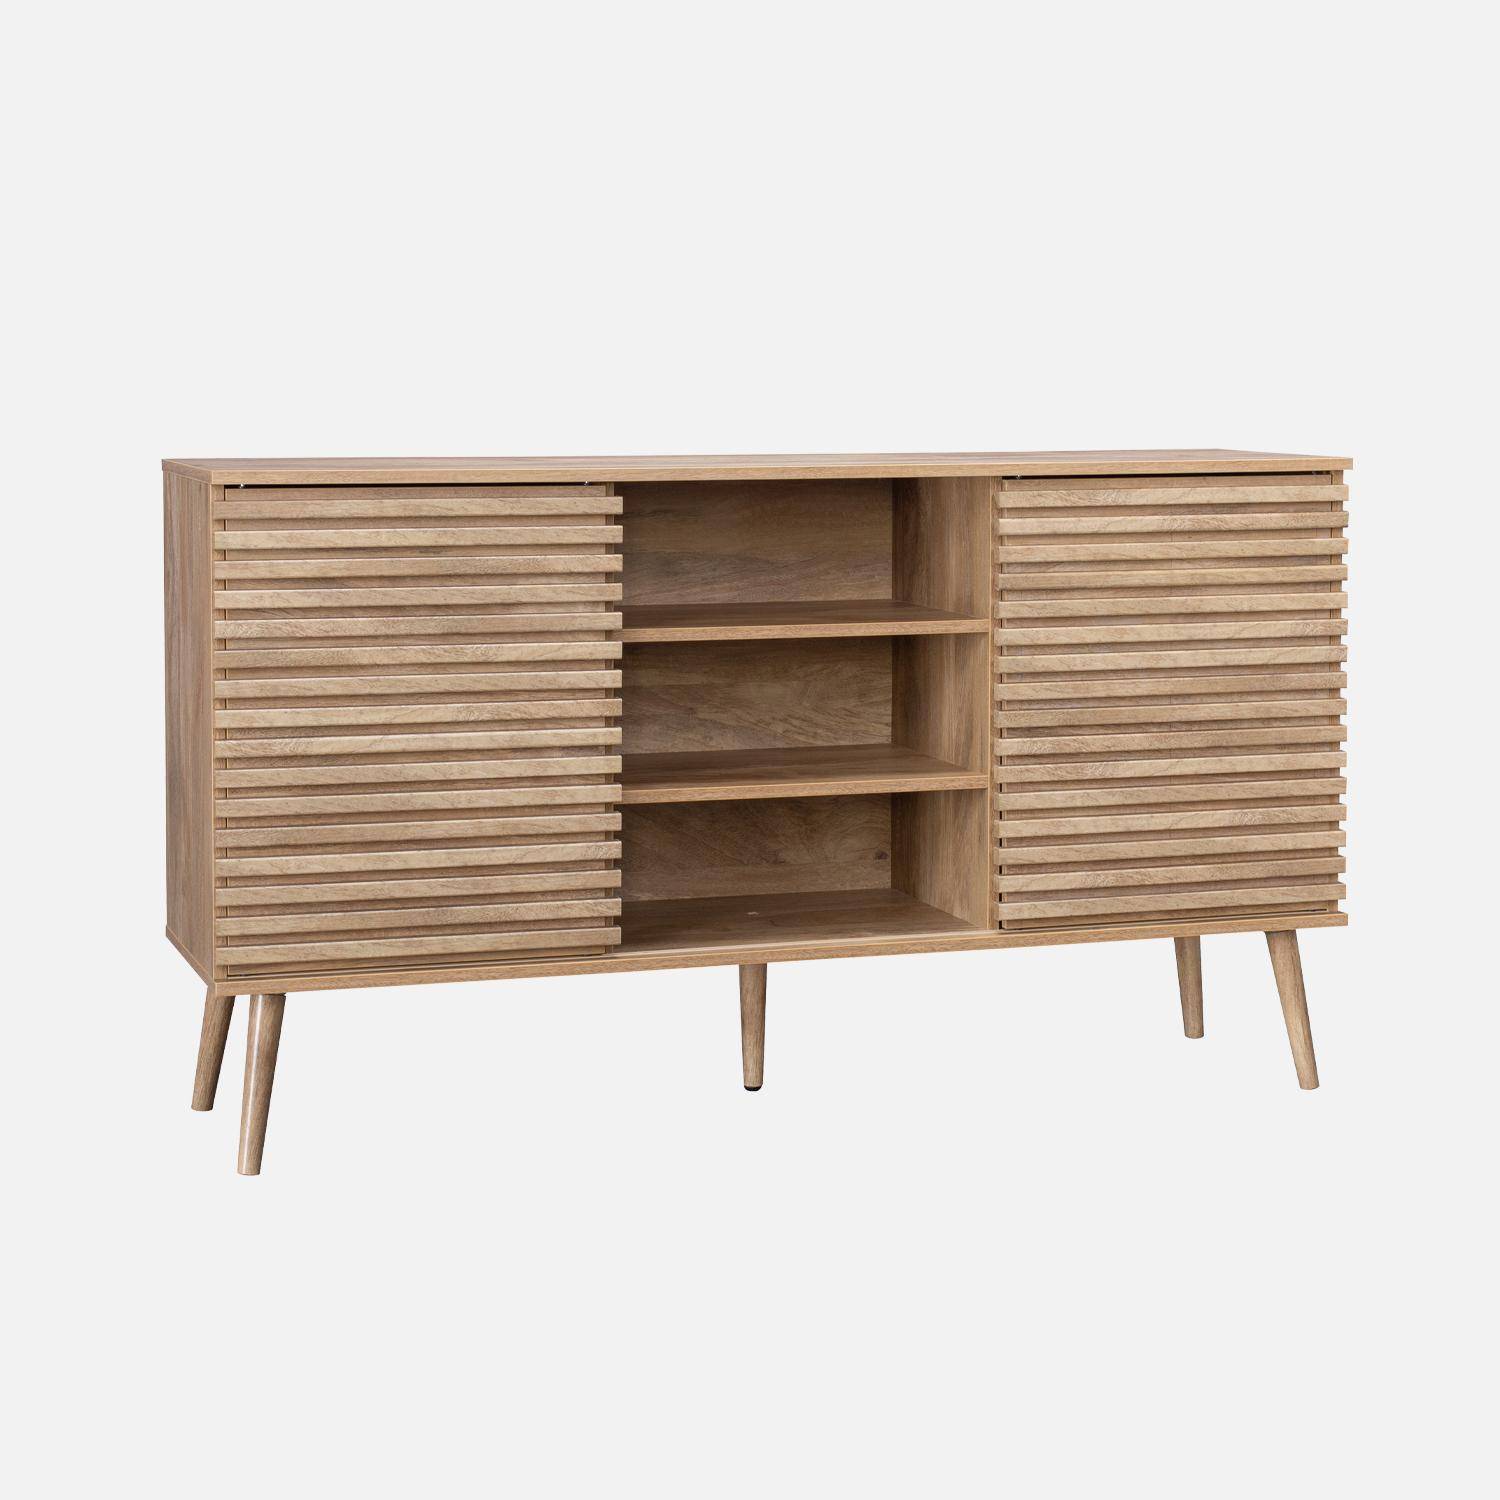 Scandinavian sideboard in wood decor with 2 grooved sliding doors and 4 shelves L 140 Photo4